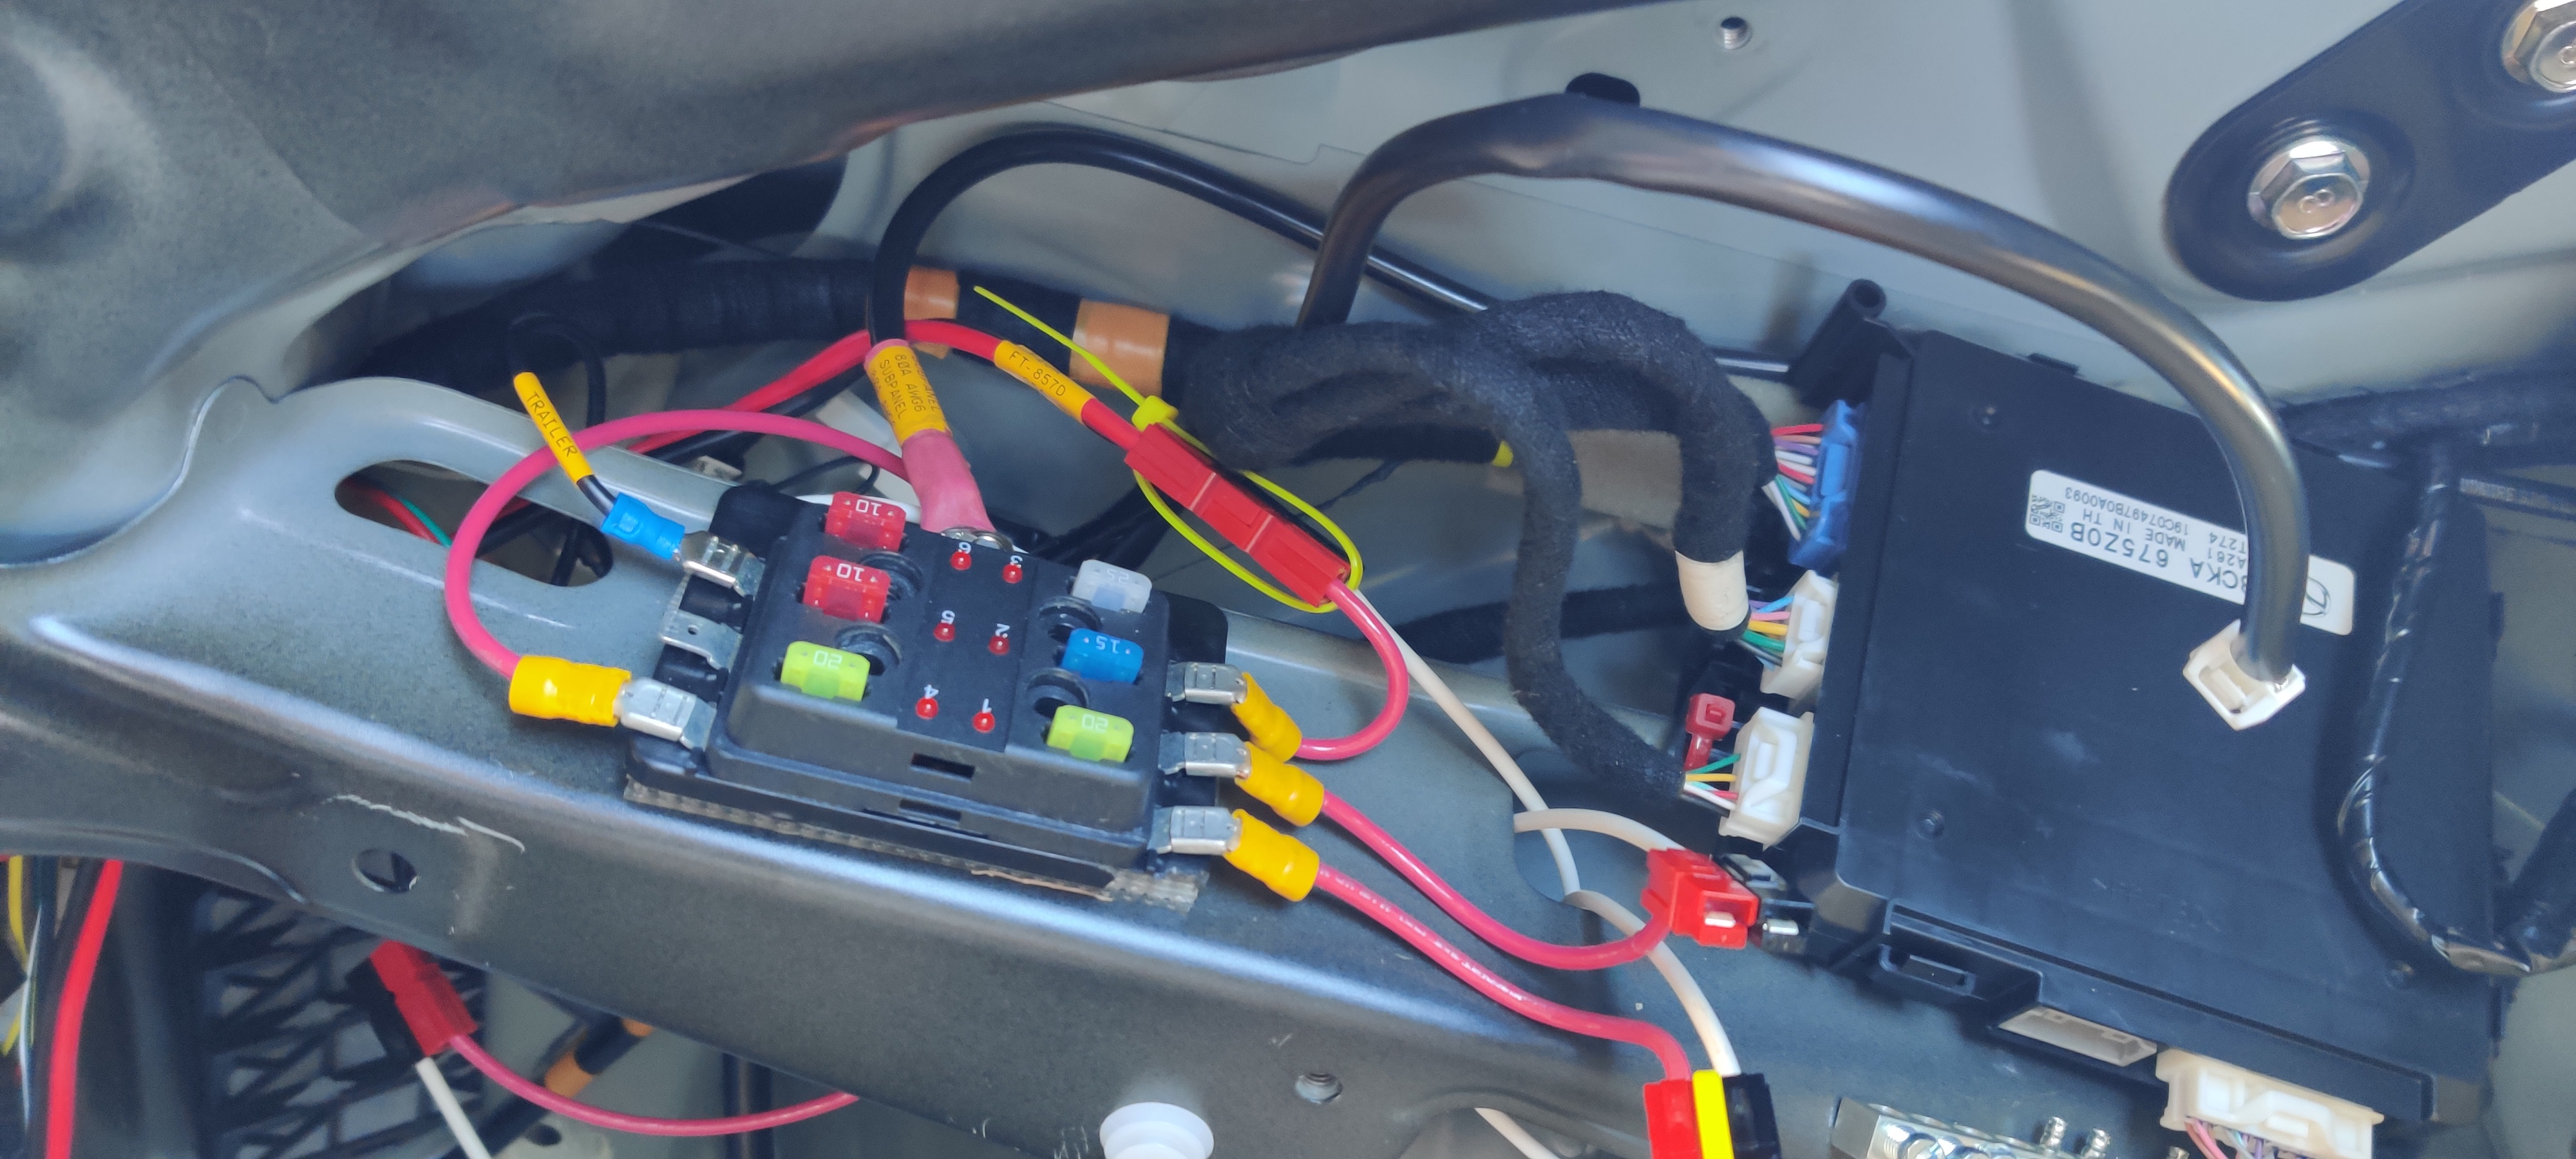 Driver's side rear quarterpanel. The right-most black box is the OEM "ELECTRICAL SUPPLY MODULE", relocated under the seatbelt reel. The subpanel is a cheap unit found at O'Reilly or similar.